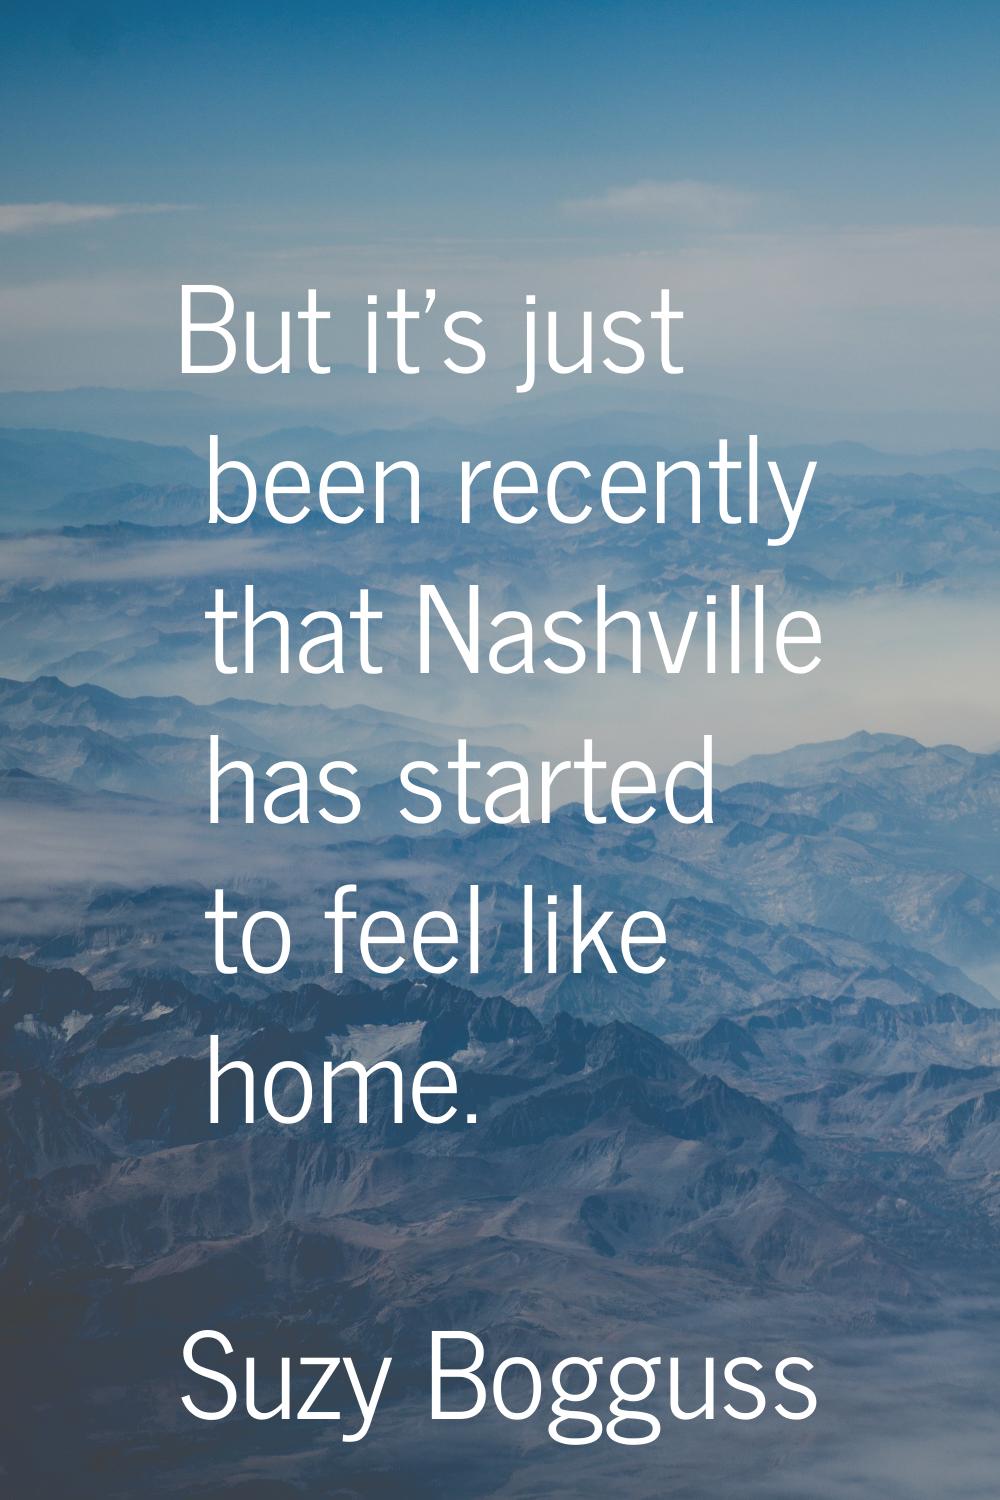 But it's just been recently that Nashville has started to feel like home.